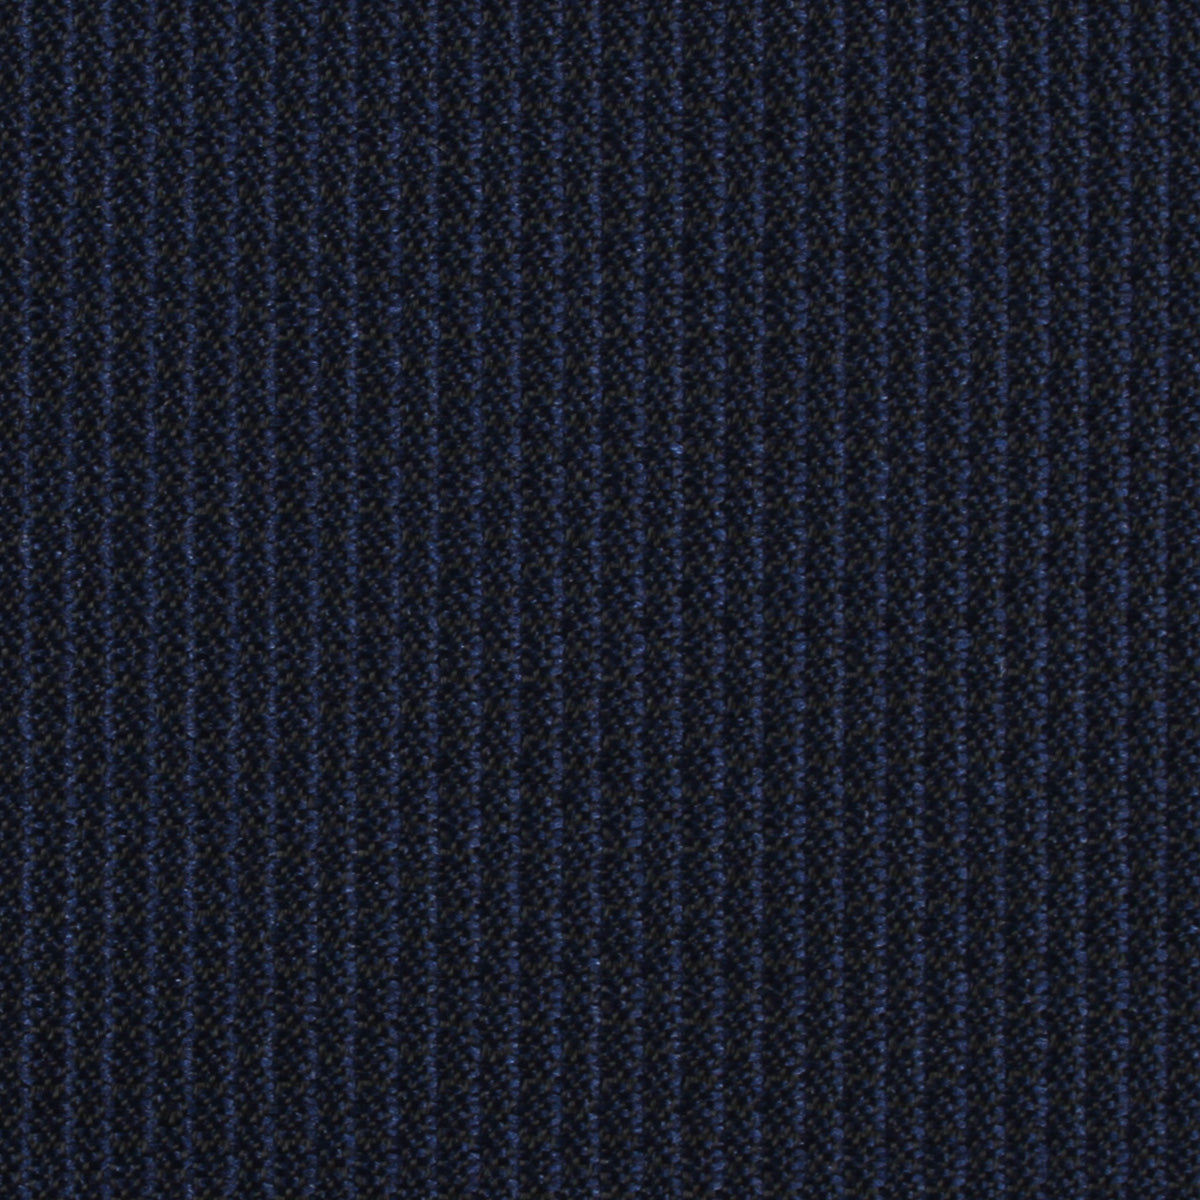 Navy Blue Weave Kids Bow Tie Fabric